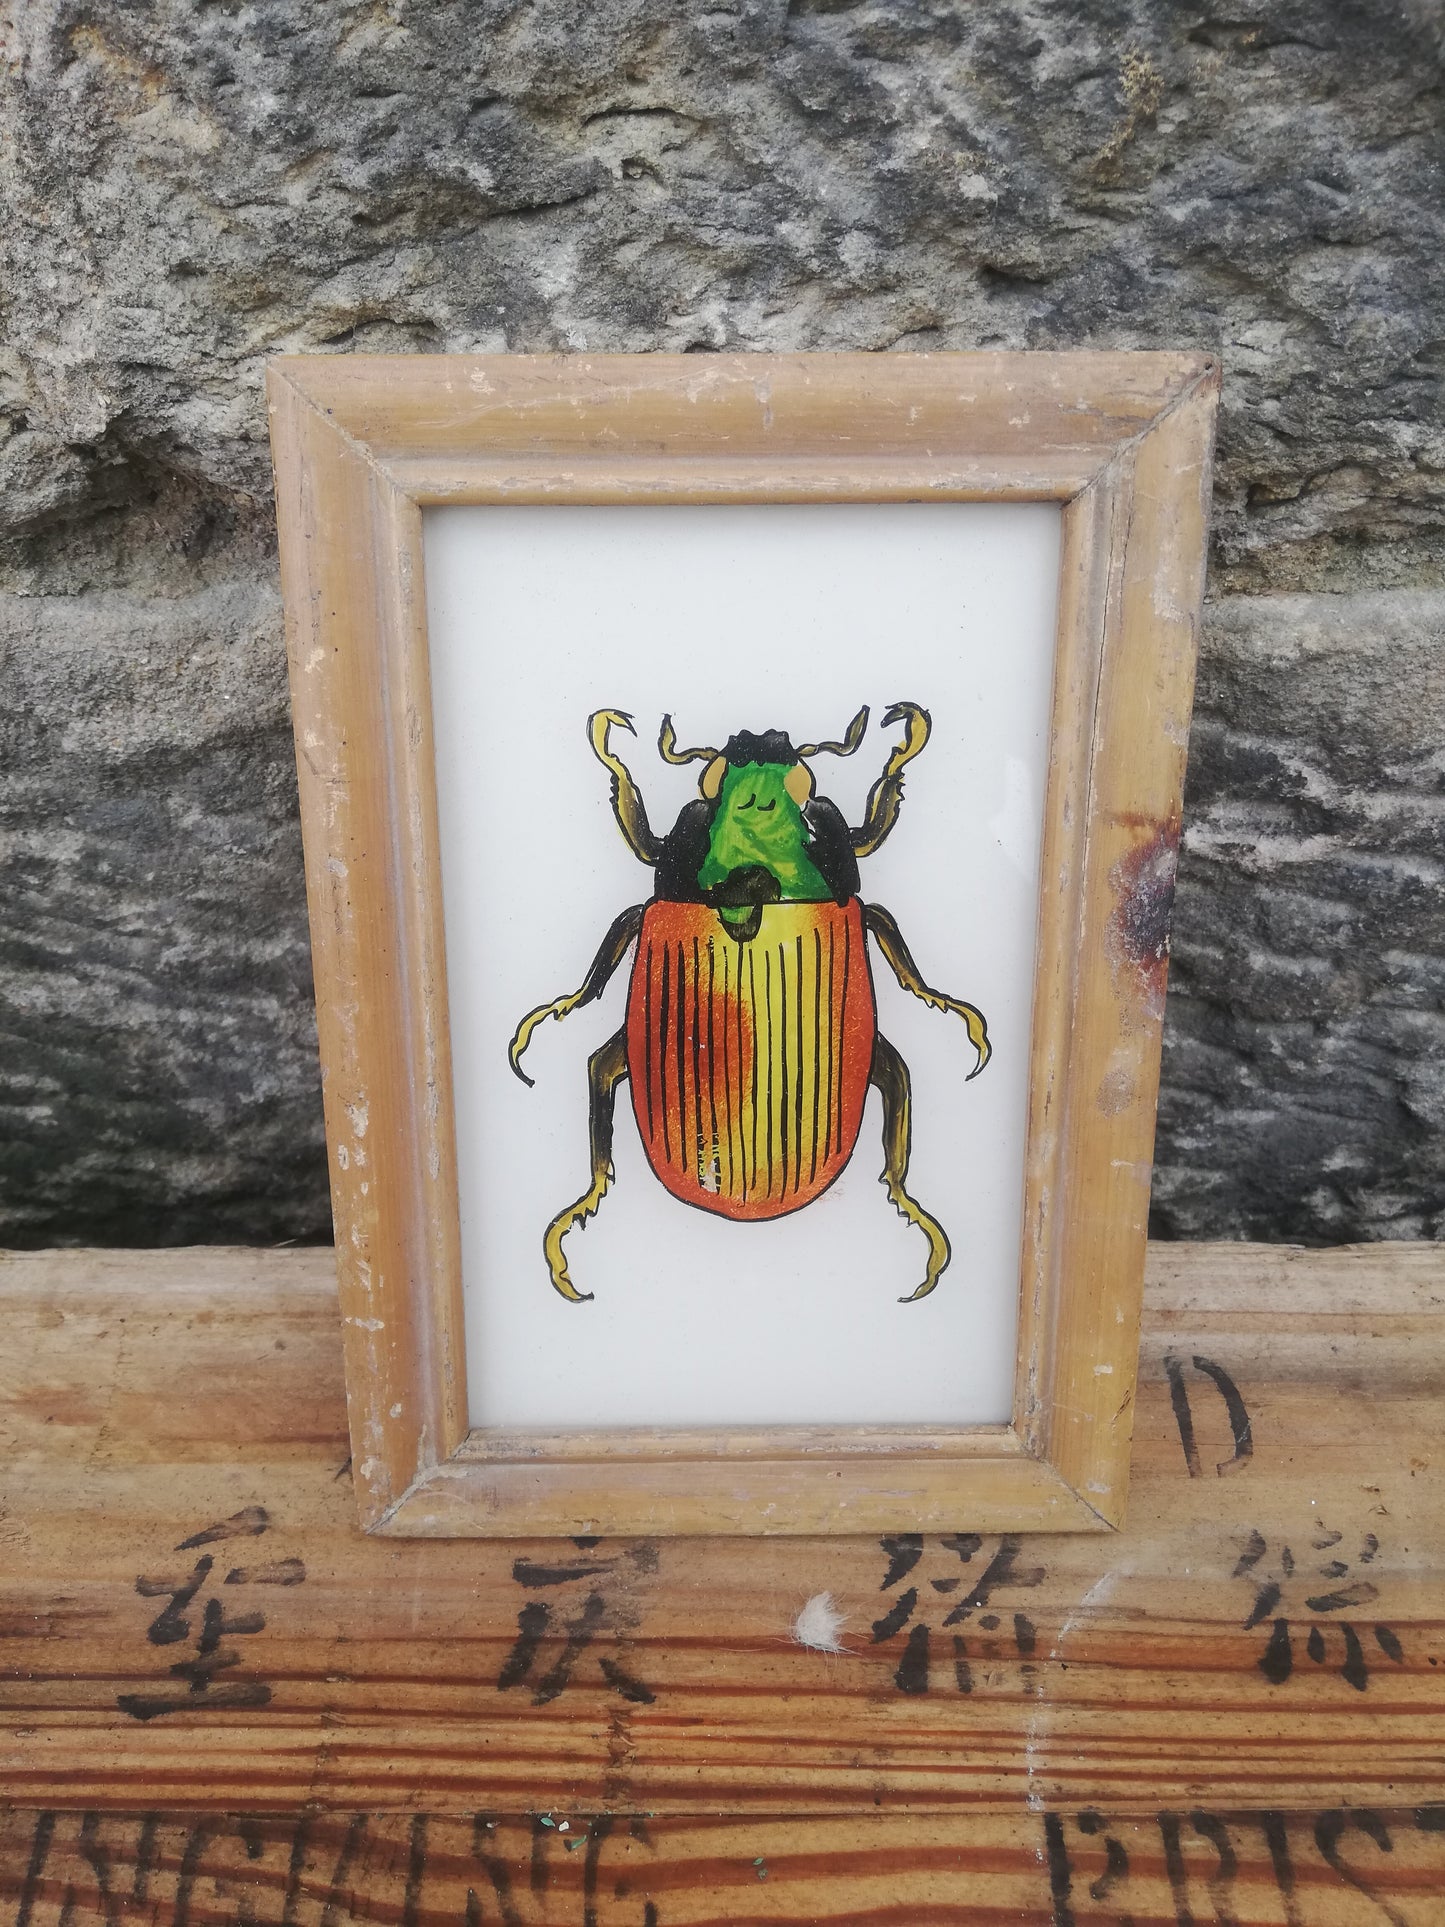 Vintage glass painting of a beetle in a beautiful original frame